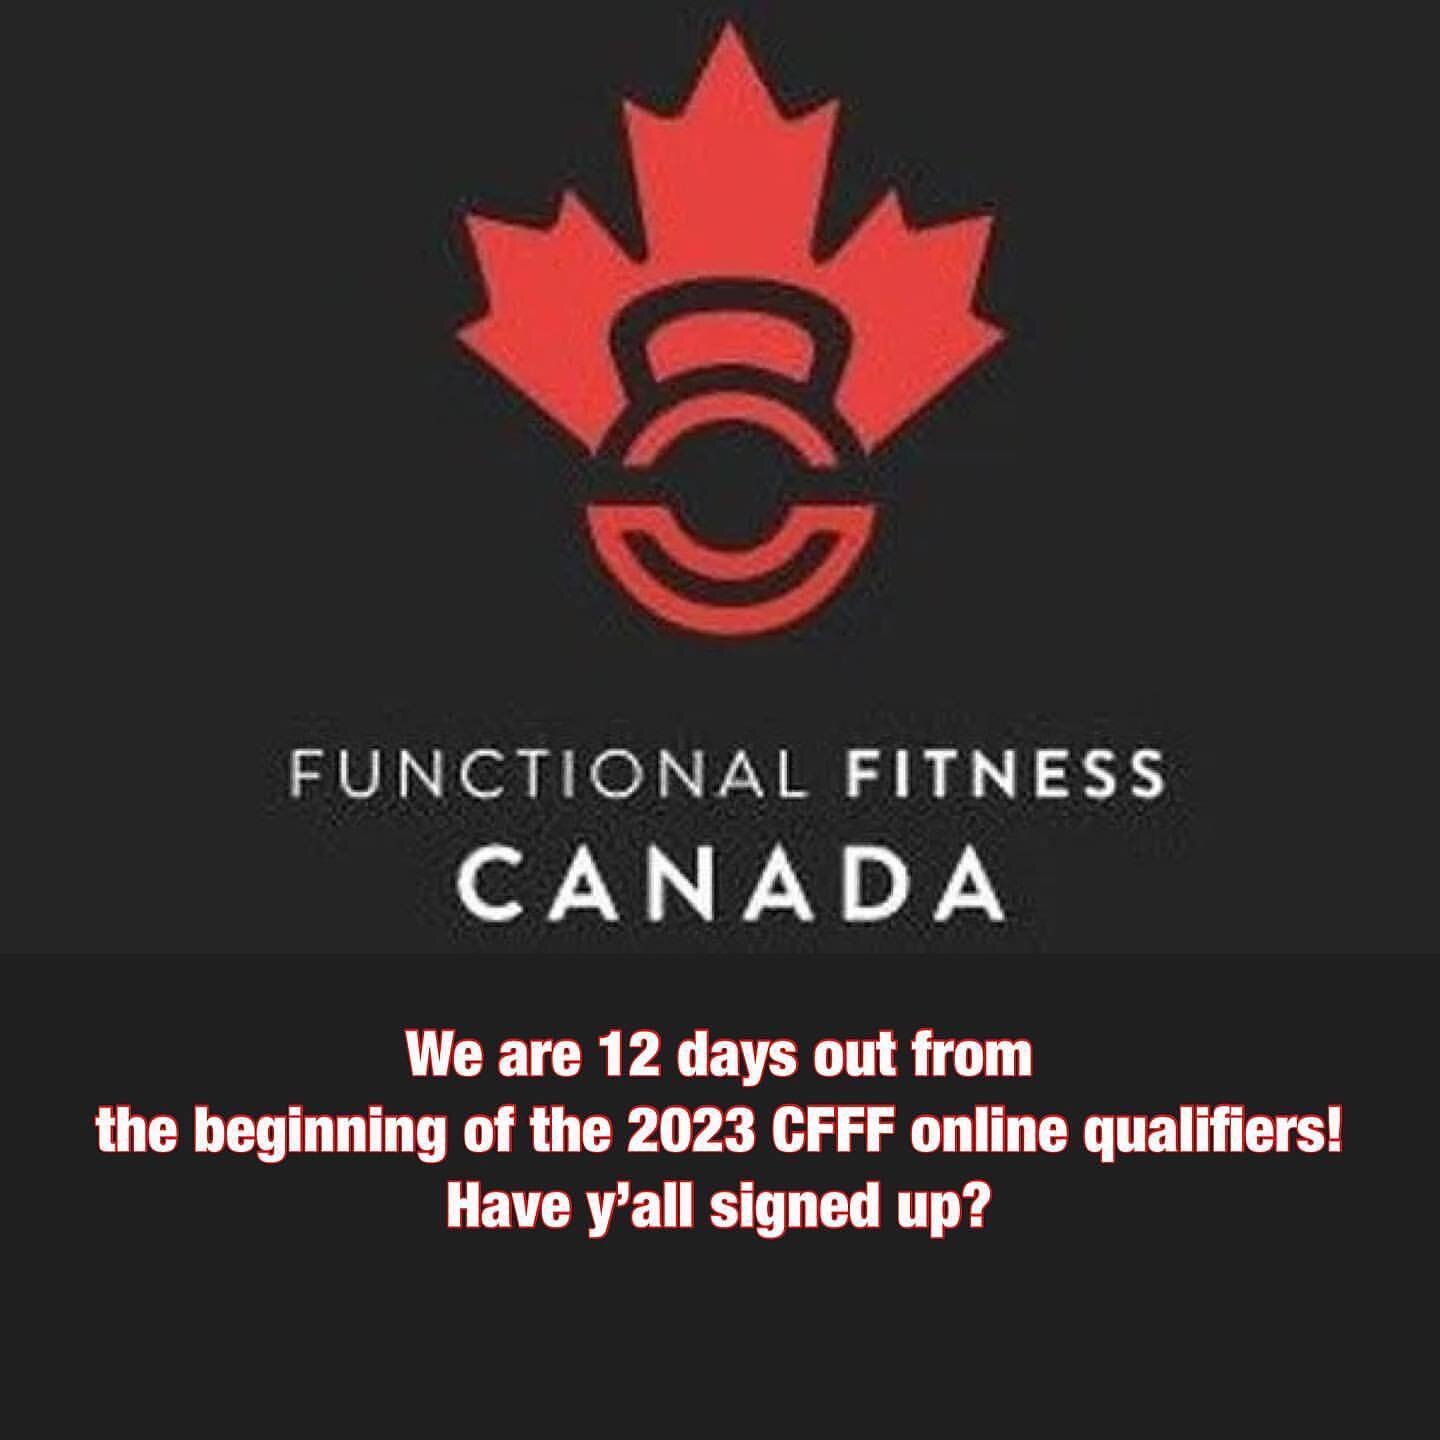 🚨🚨🚨Ontario athletes!!🚨🚨🚨
.
Register for the CFFF Online Qualifiers.
.
Maters April 13-16
Seniors &amp; Juniors April 20-23
.
Registration link in bio. 
.

Posted @withregram &bull; @canadian_functional_fitness 🚨 CFFF ONLINE QUALIFIERS 🚨 
Don&